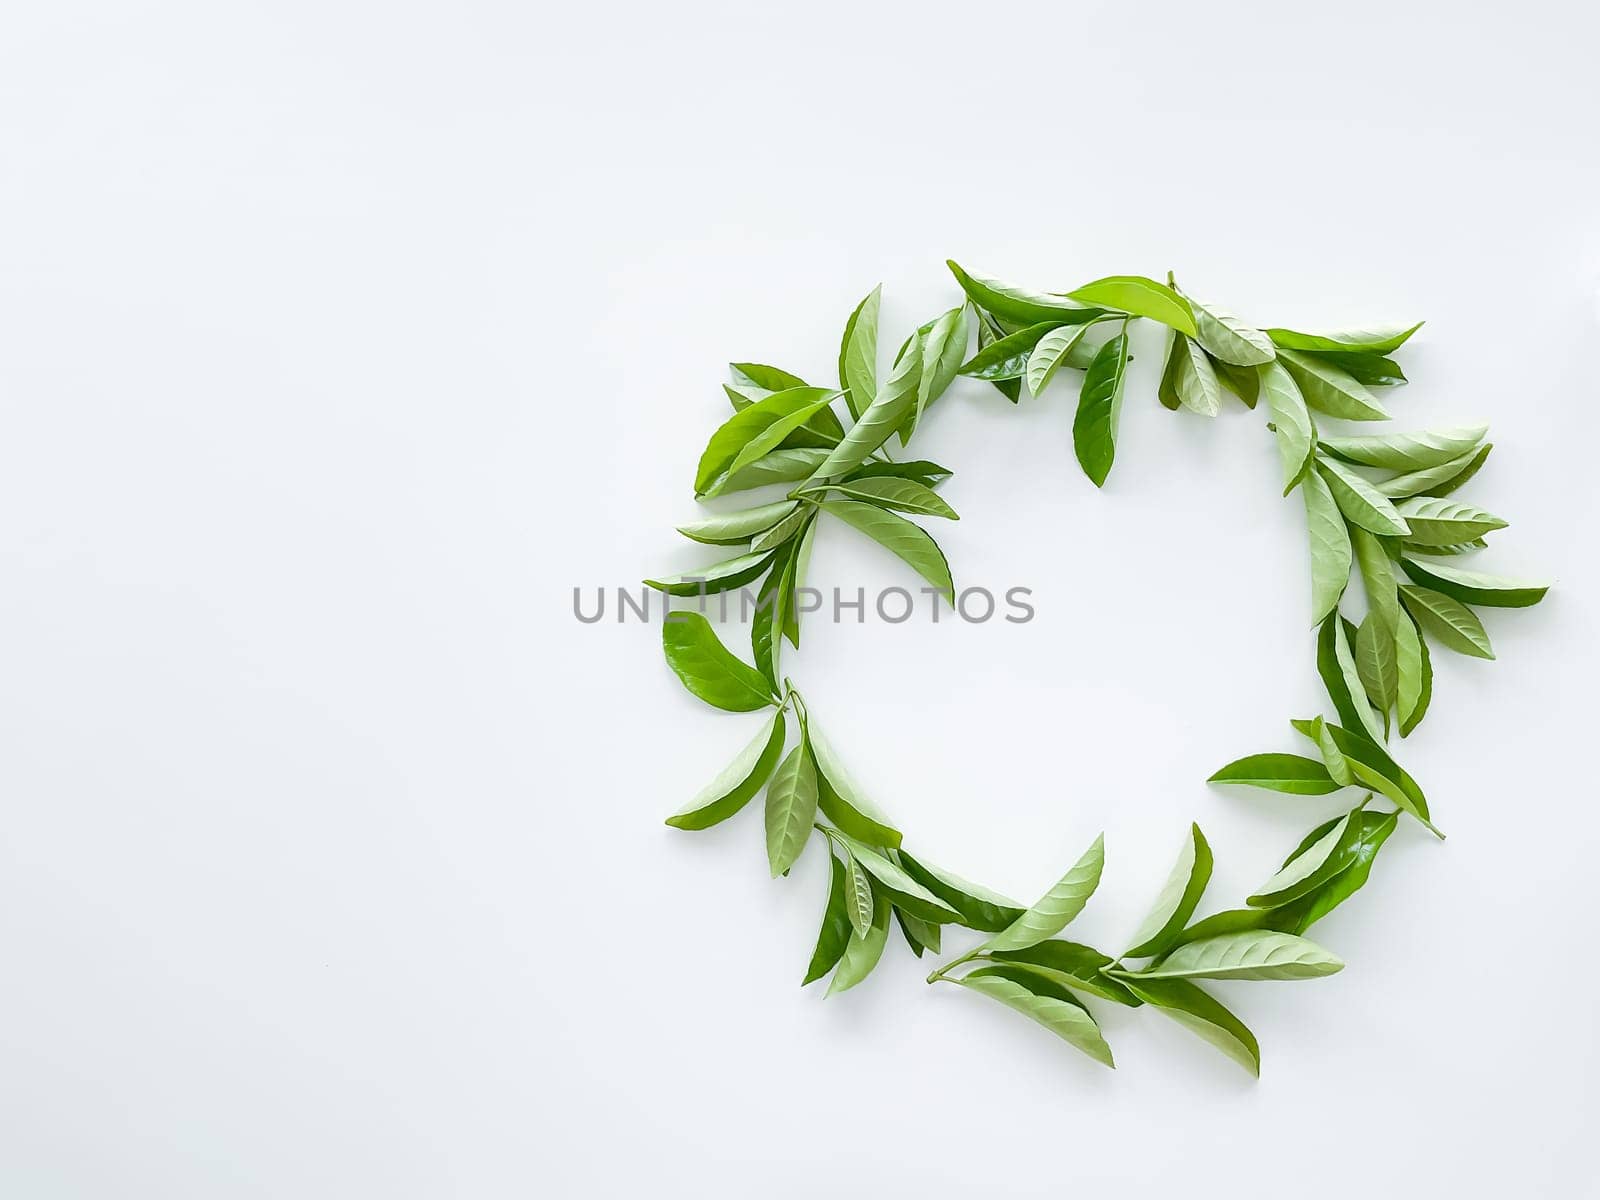 frame workspace with green leaves on white background. lay flat, top view. High quality photo